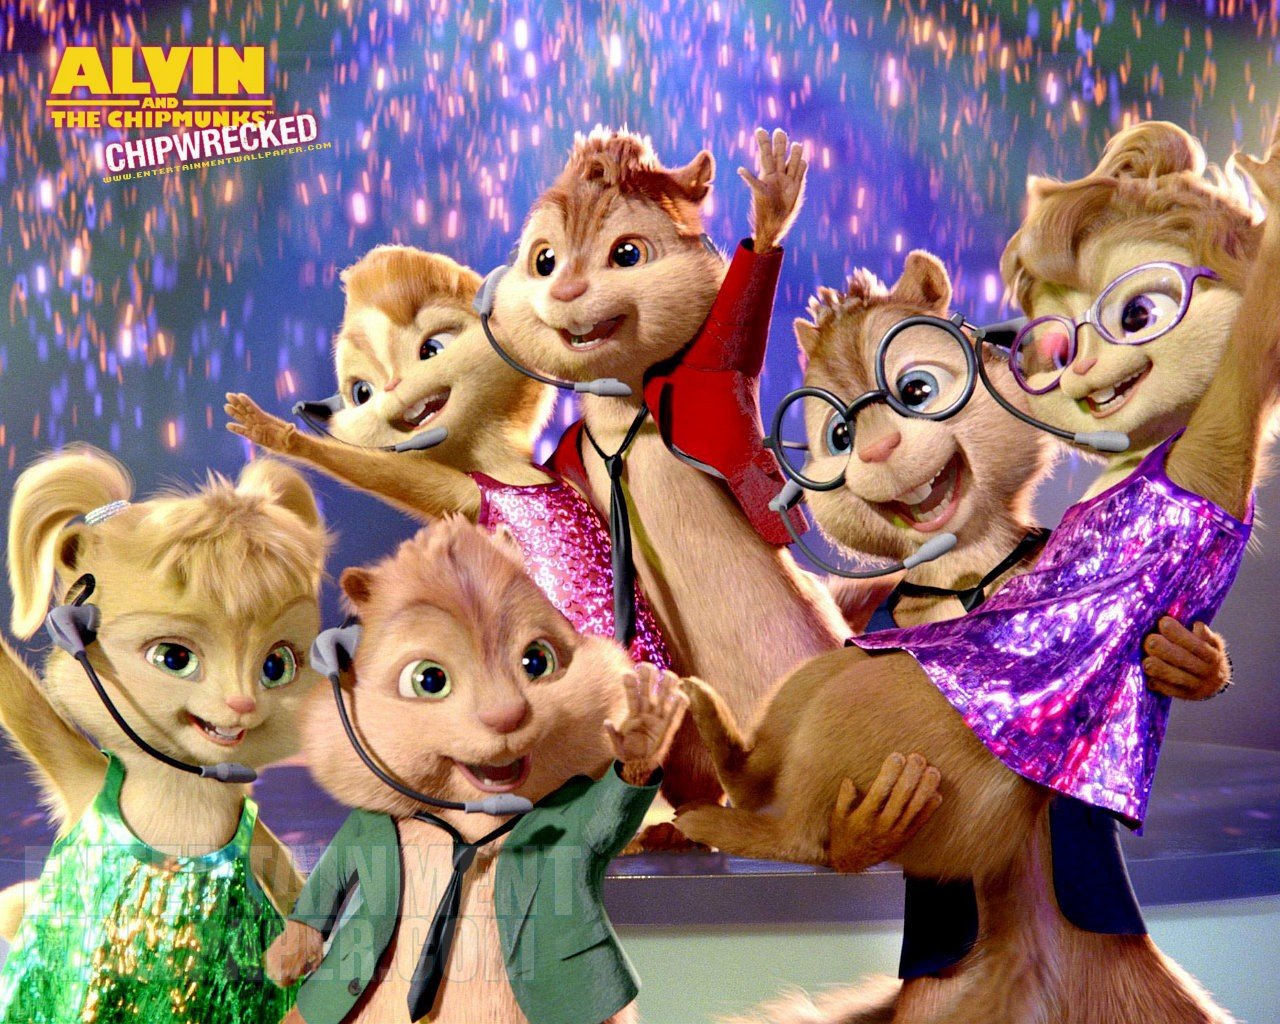 Alvin and the Chipmunks Chip Wrecked Wallpaper   10029691 1280x1024